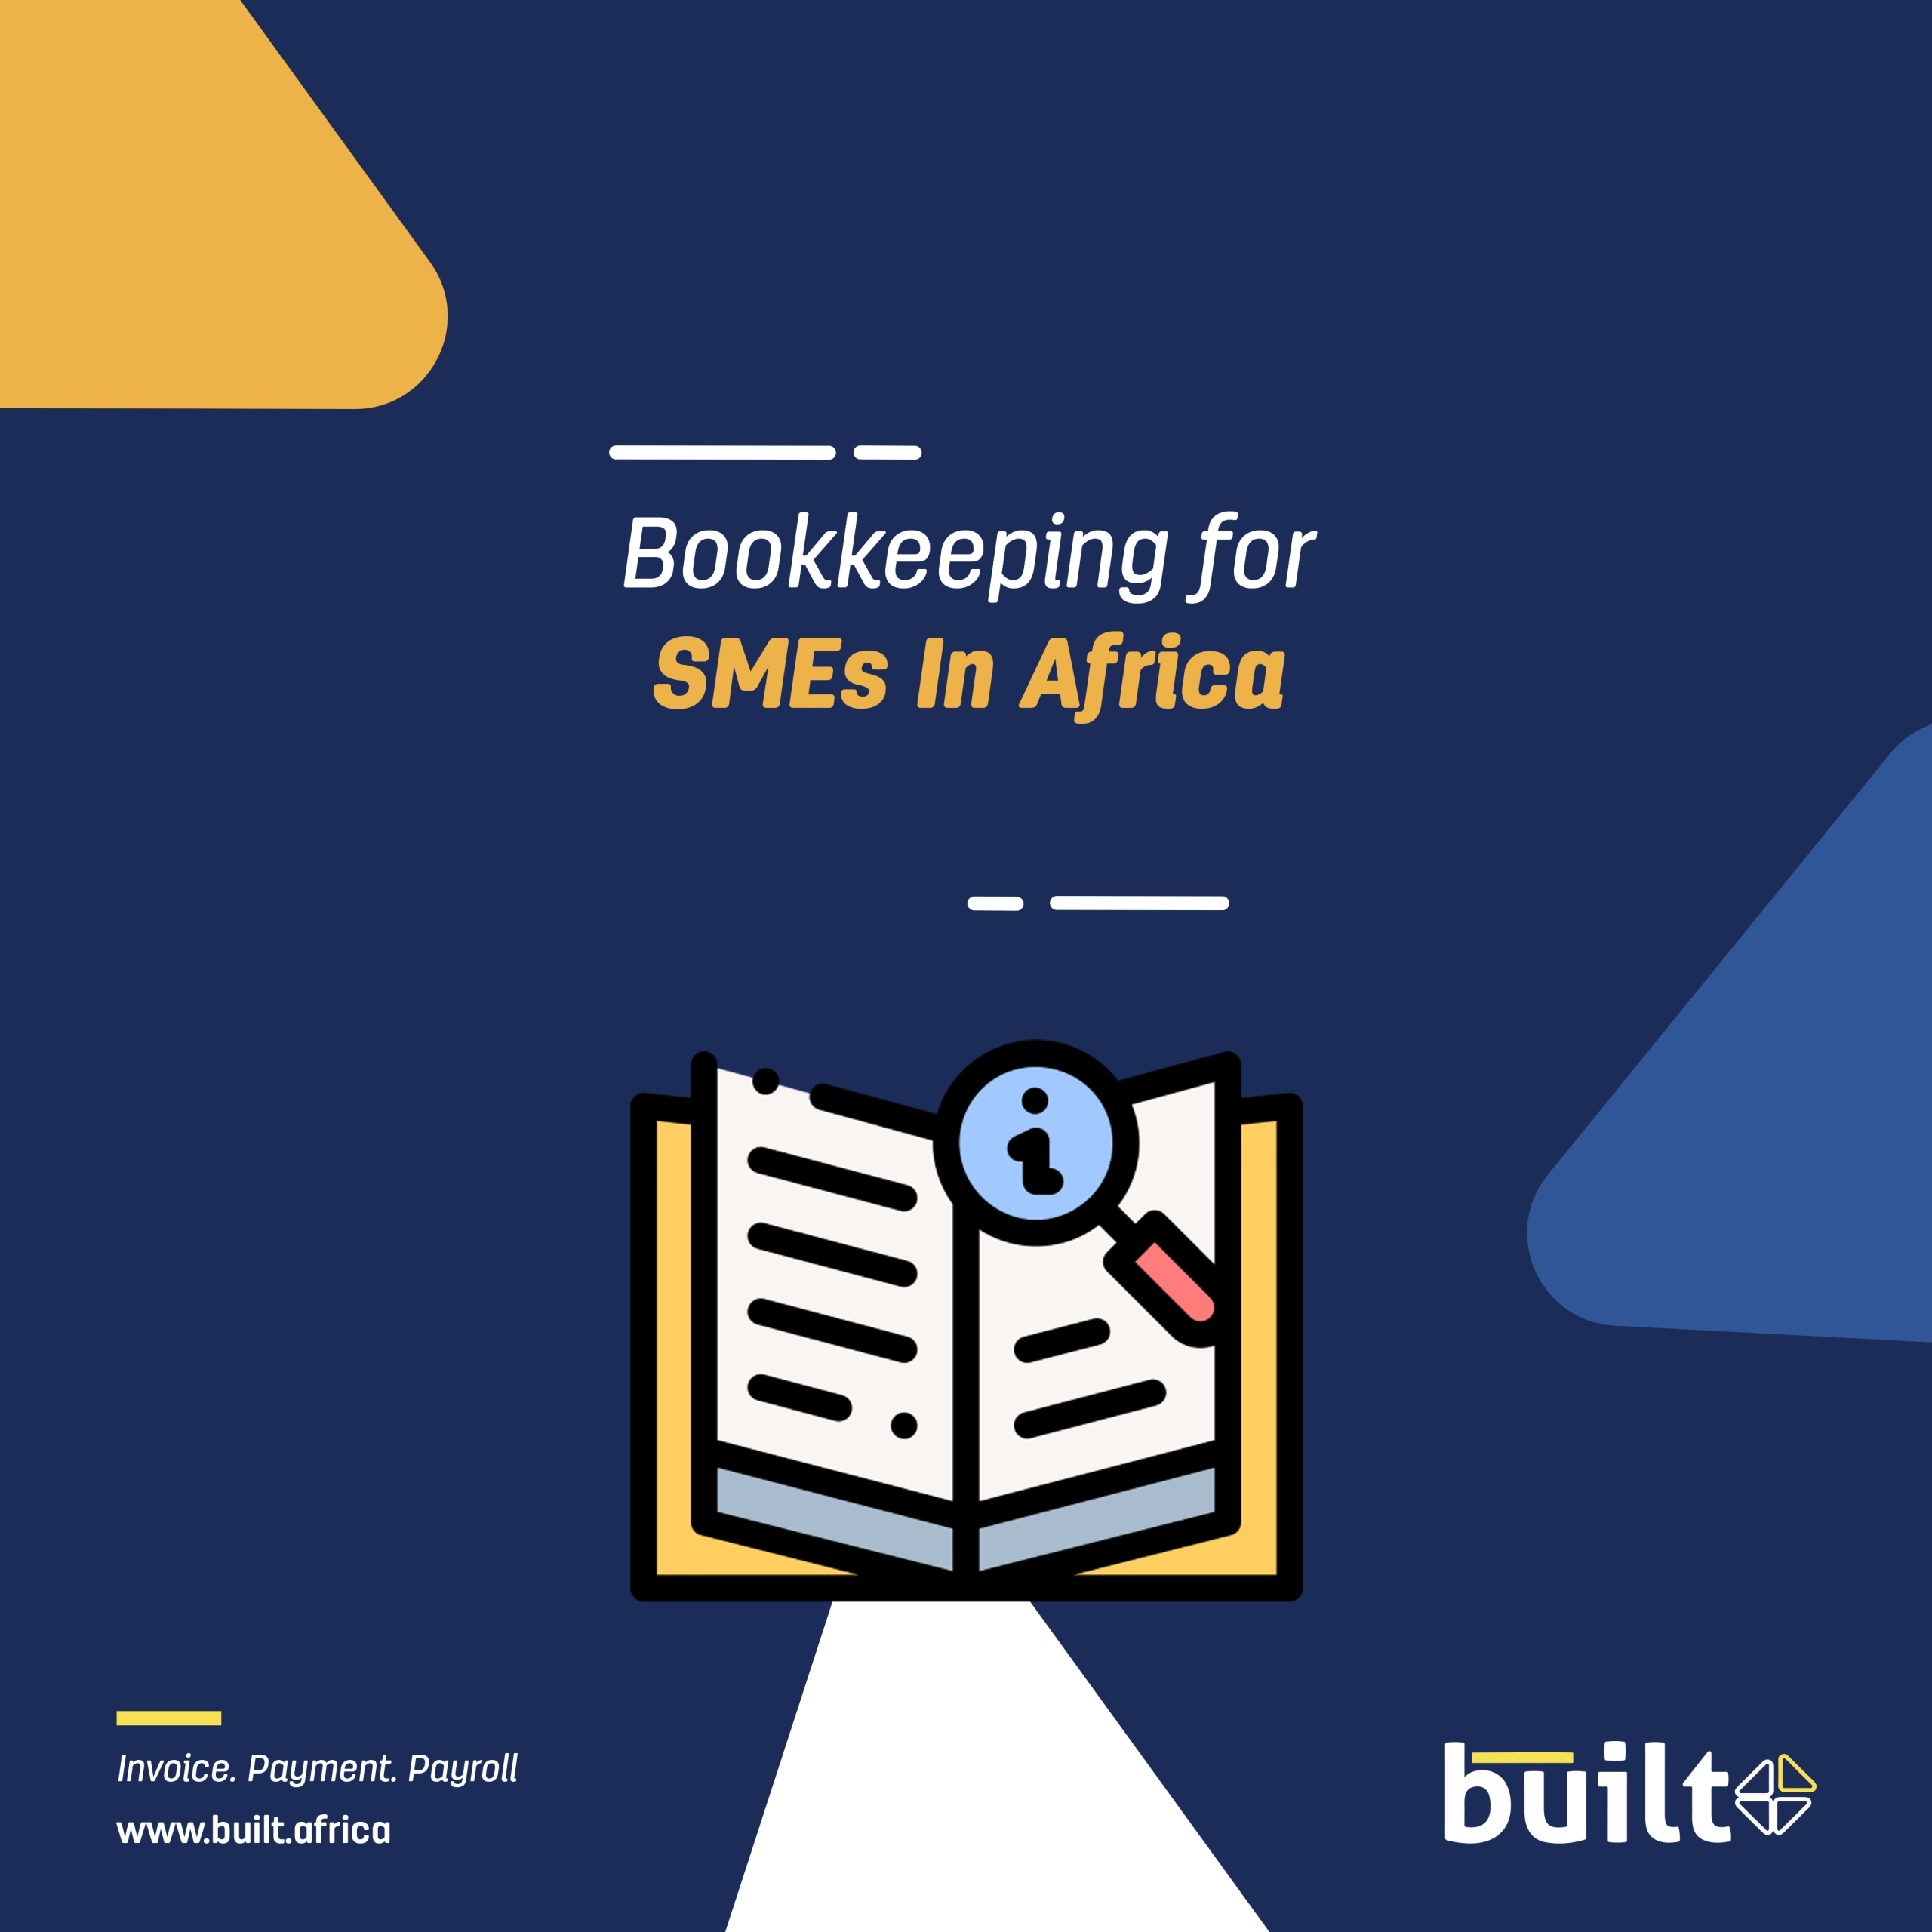 bookkeeping for SMEs in Africa